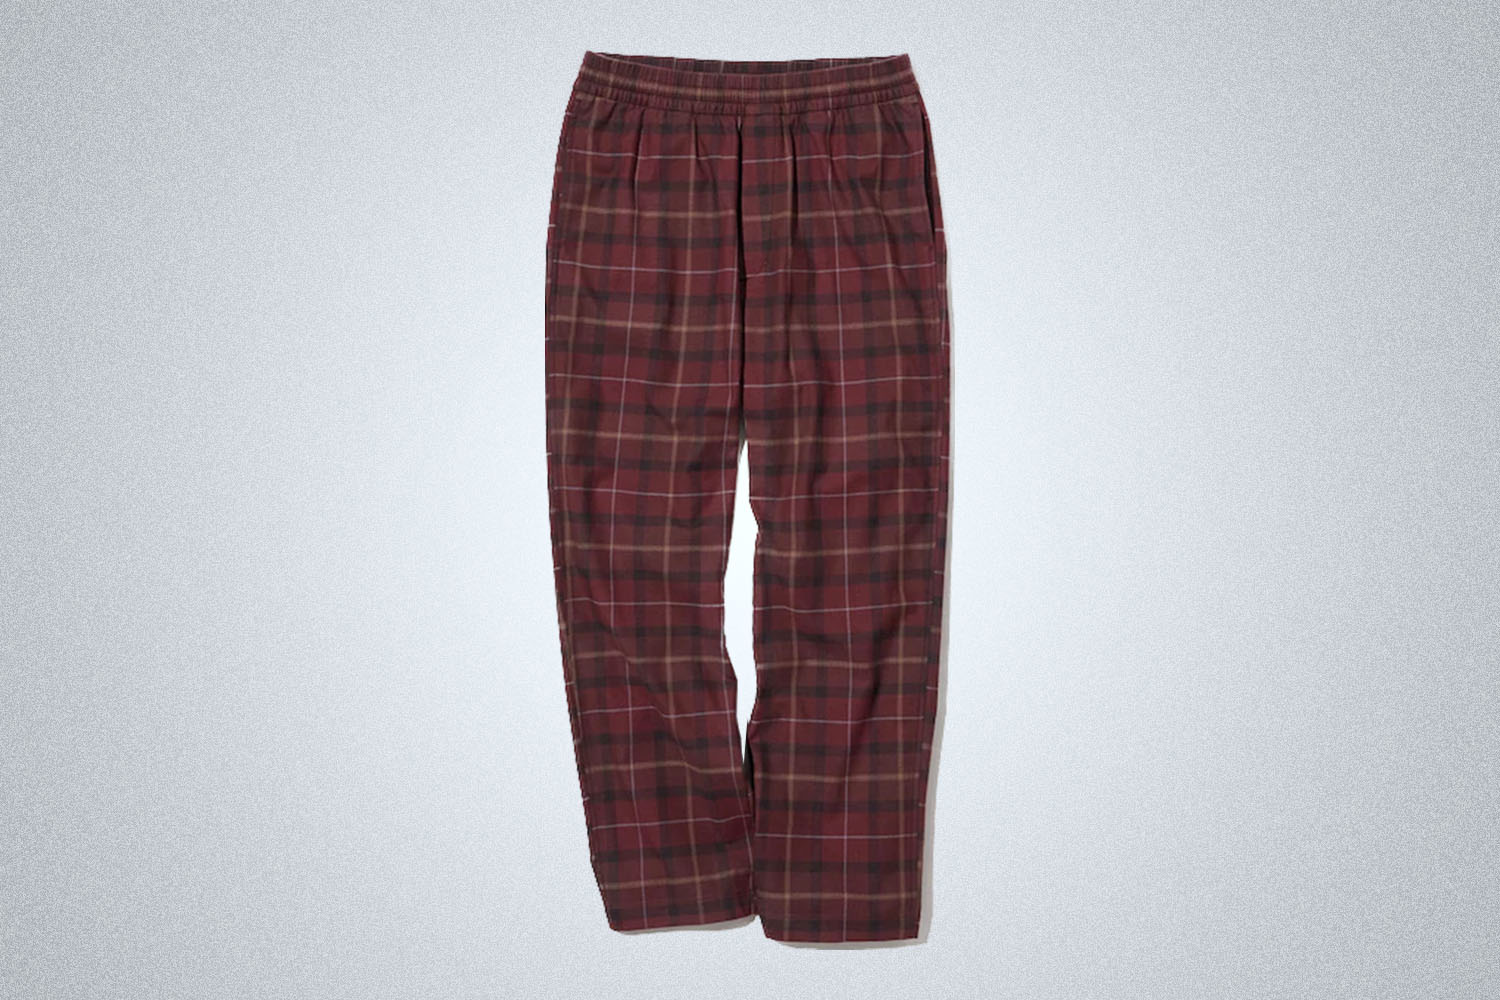 19 Best Mens Pajamas in 2023 ComfyCozy PJs to Help You Nod Off in Style   GQ